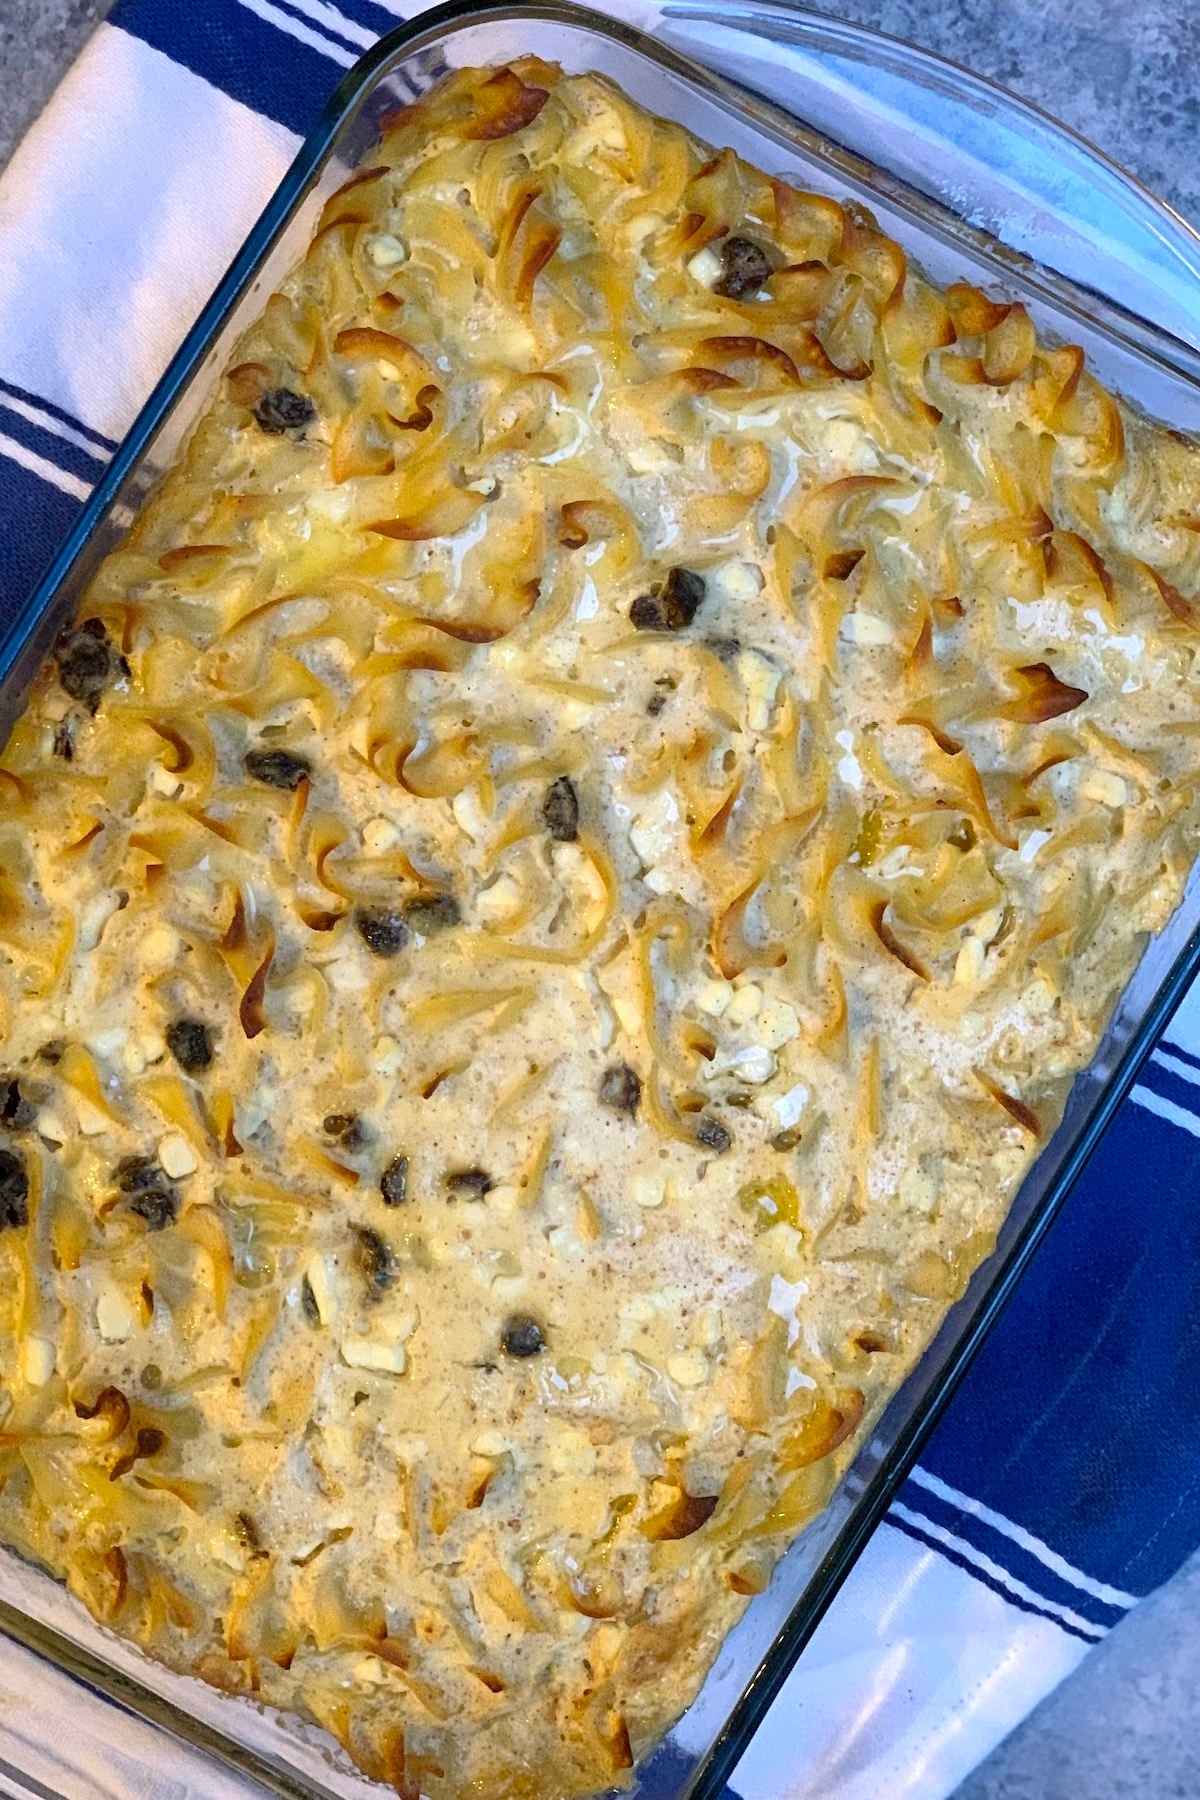 Kugel is a Jewish dish that’s made with noodles and is similar to a casserole. If you didn’t grow up enjoying this rich and hearty dish, you’re in for a treat. Perfect as a side dish, Noodle Kugel pairs well with meat, fish, and vegetables, or even can be enjoyed as a sweet treat for breakfast!